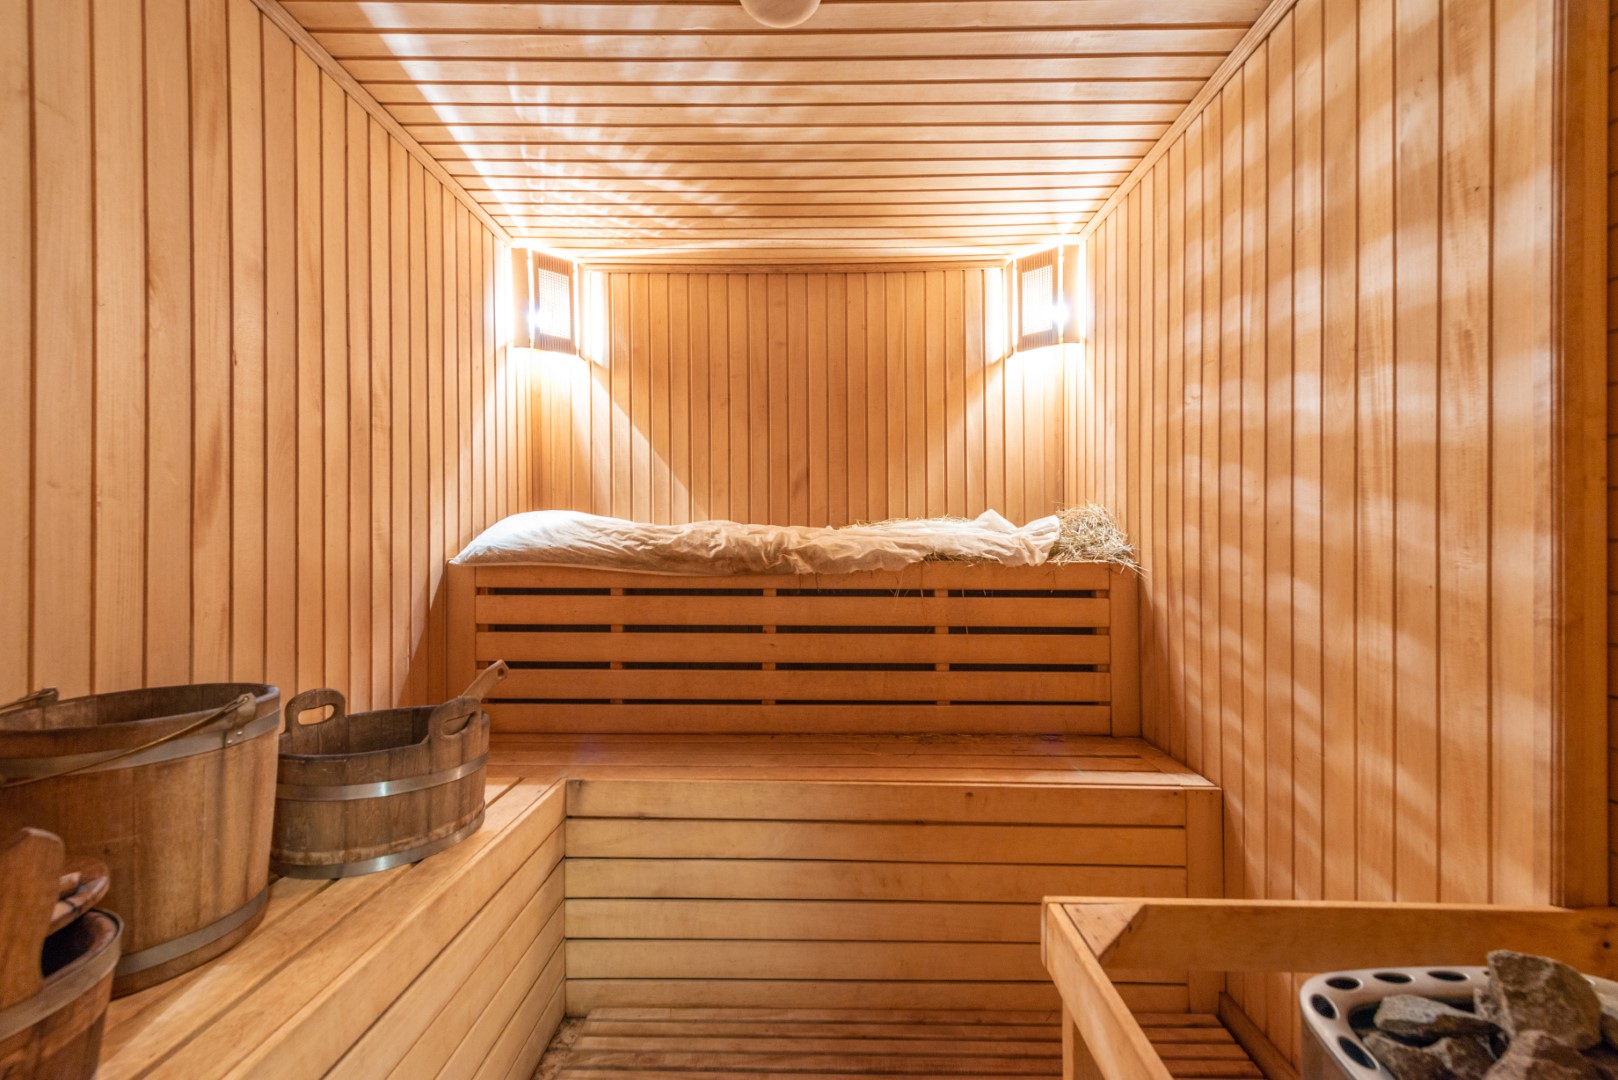 A True German Spa Experience: Everything you need to know about the German  Sauna Baths - WanderInGermany